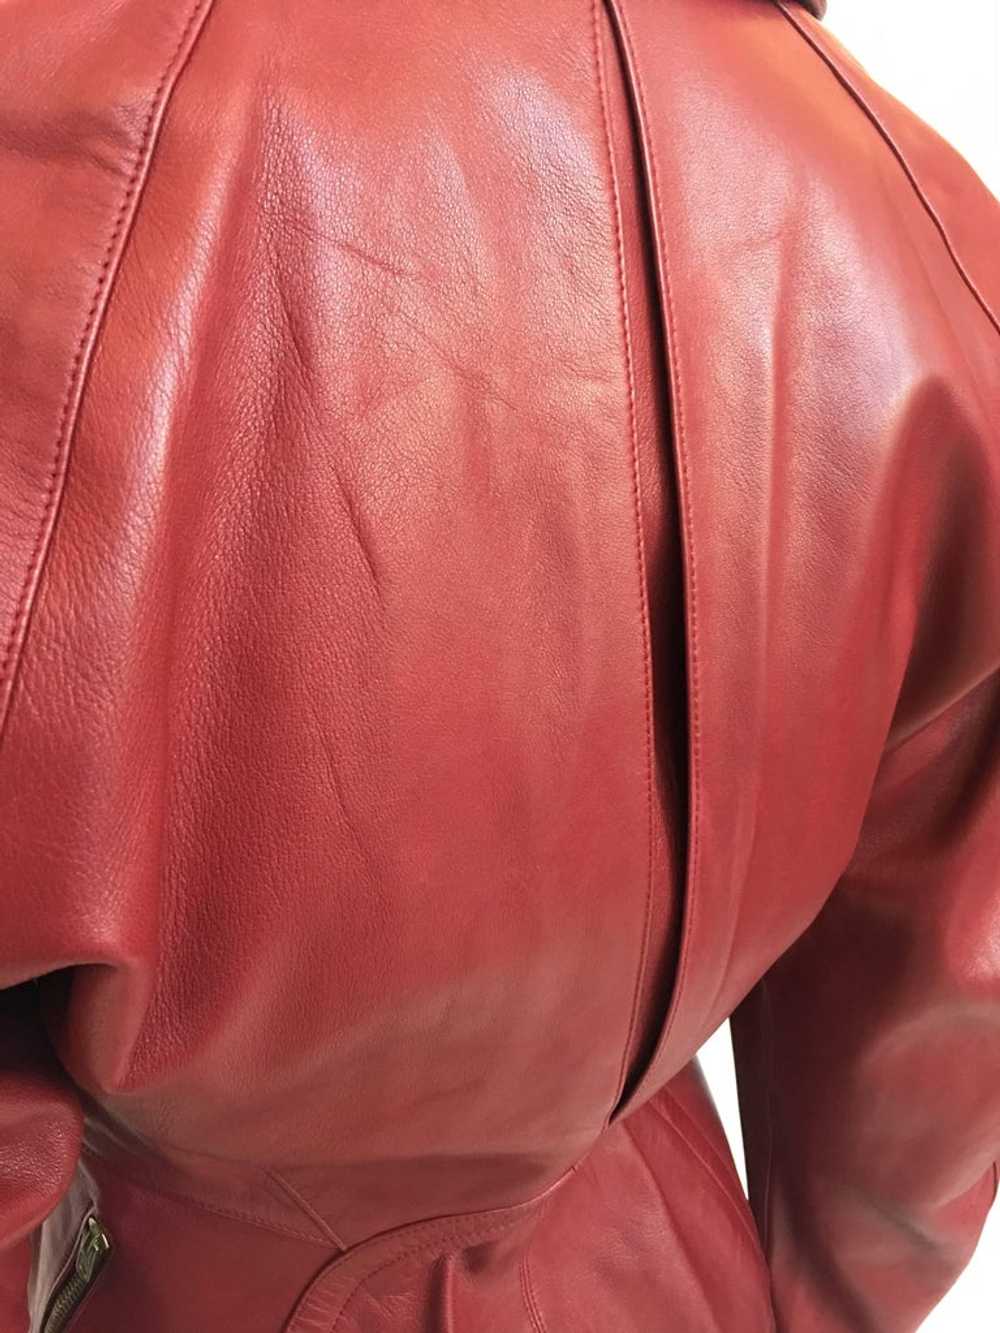 Alaïa 1980's Red Leather Skirt Suit - image 6